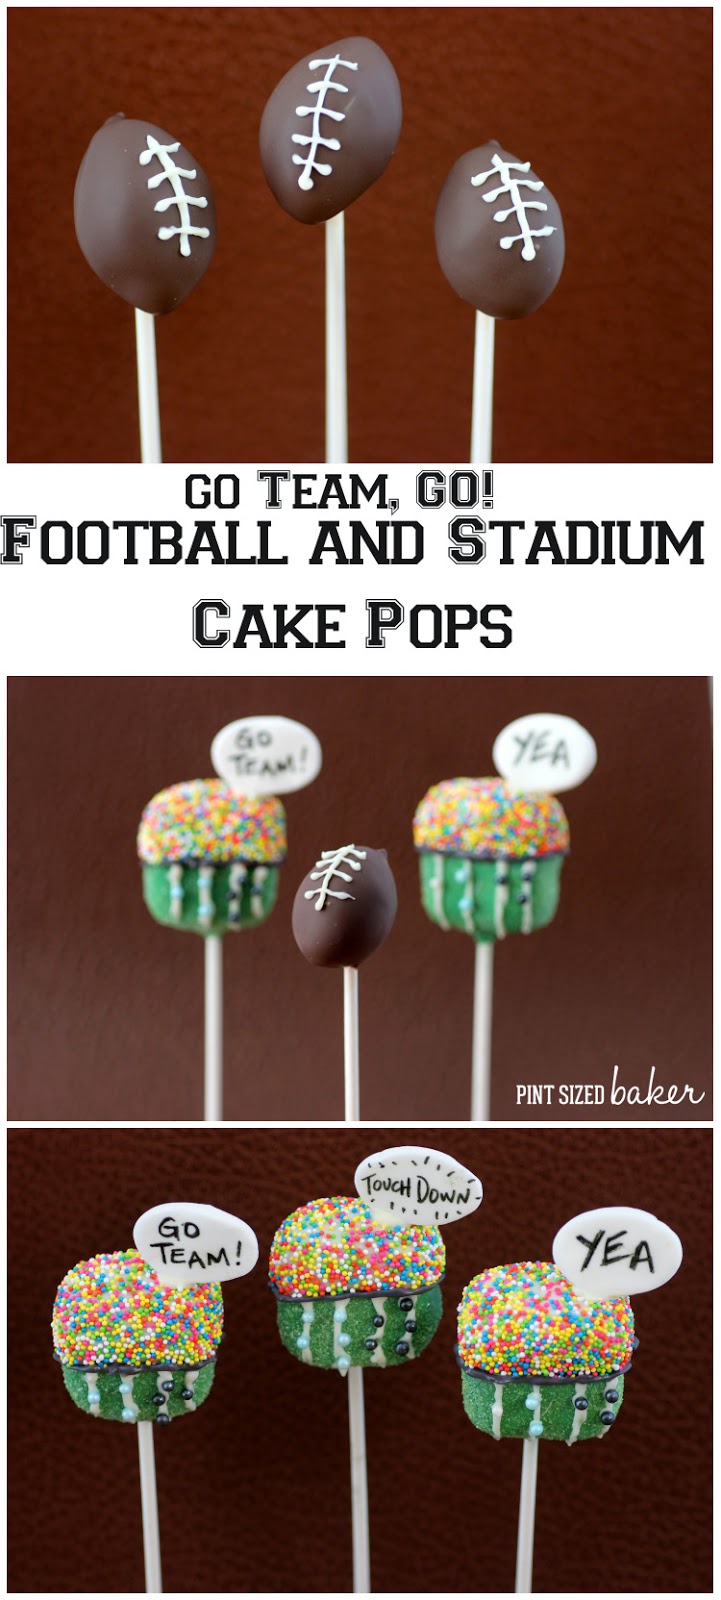 Grab the kids and get ready for FOOTBALL season! You can follow this football and stadium cake pop tutorial and bring them to the kids pee-wee game or serve them at your Monday Night Football Game party!